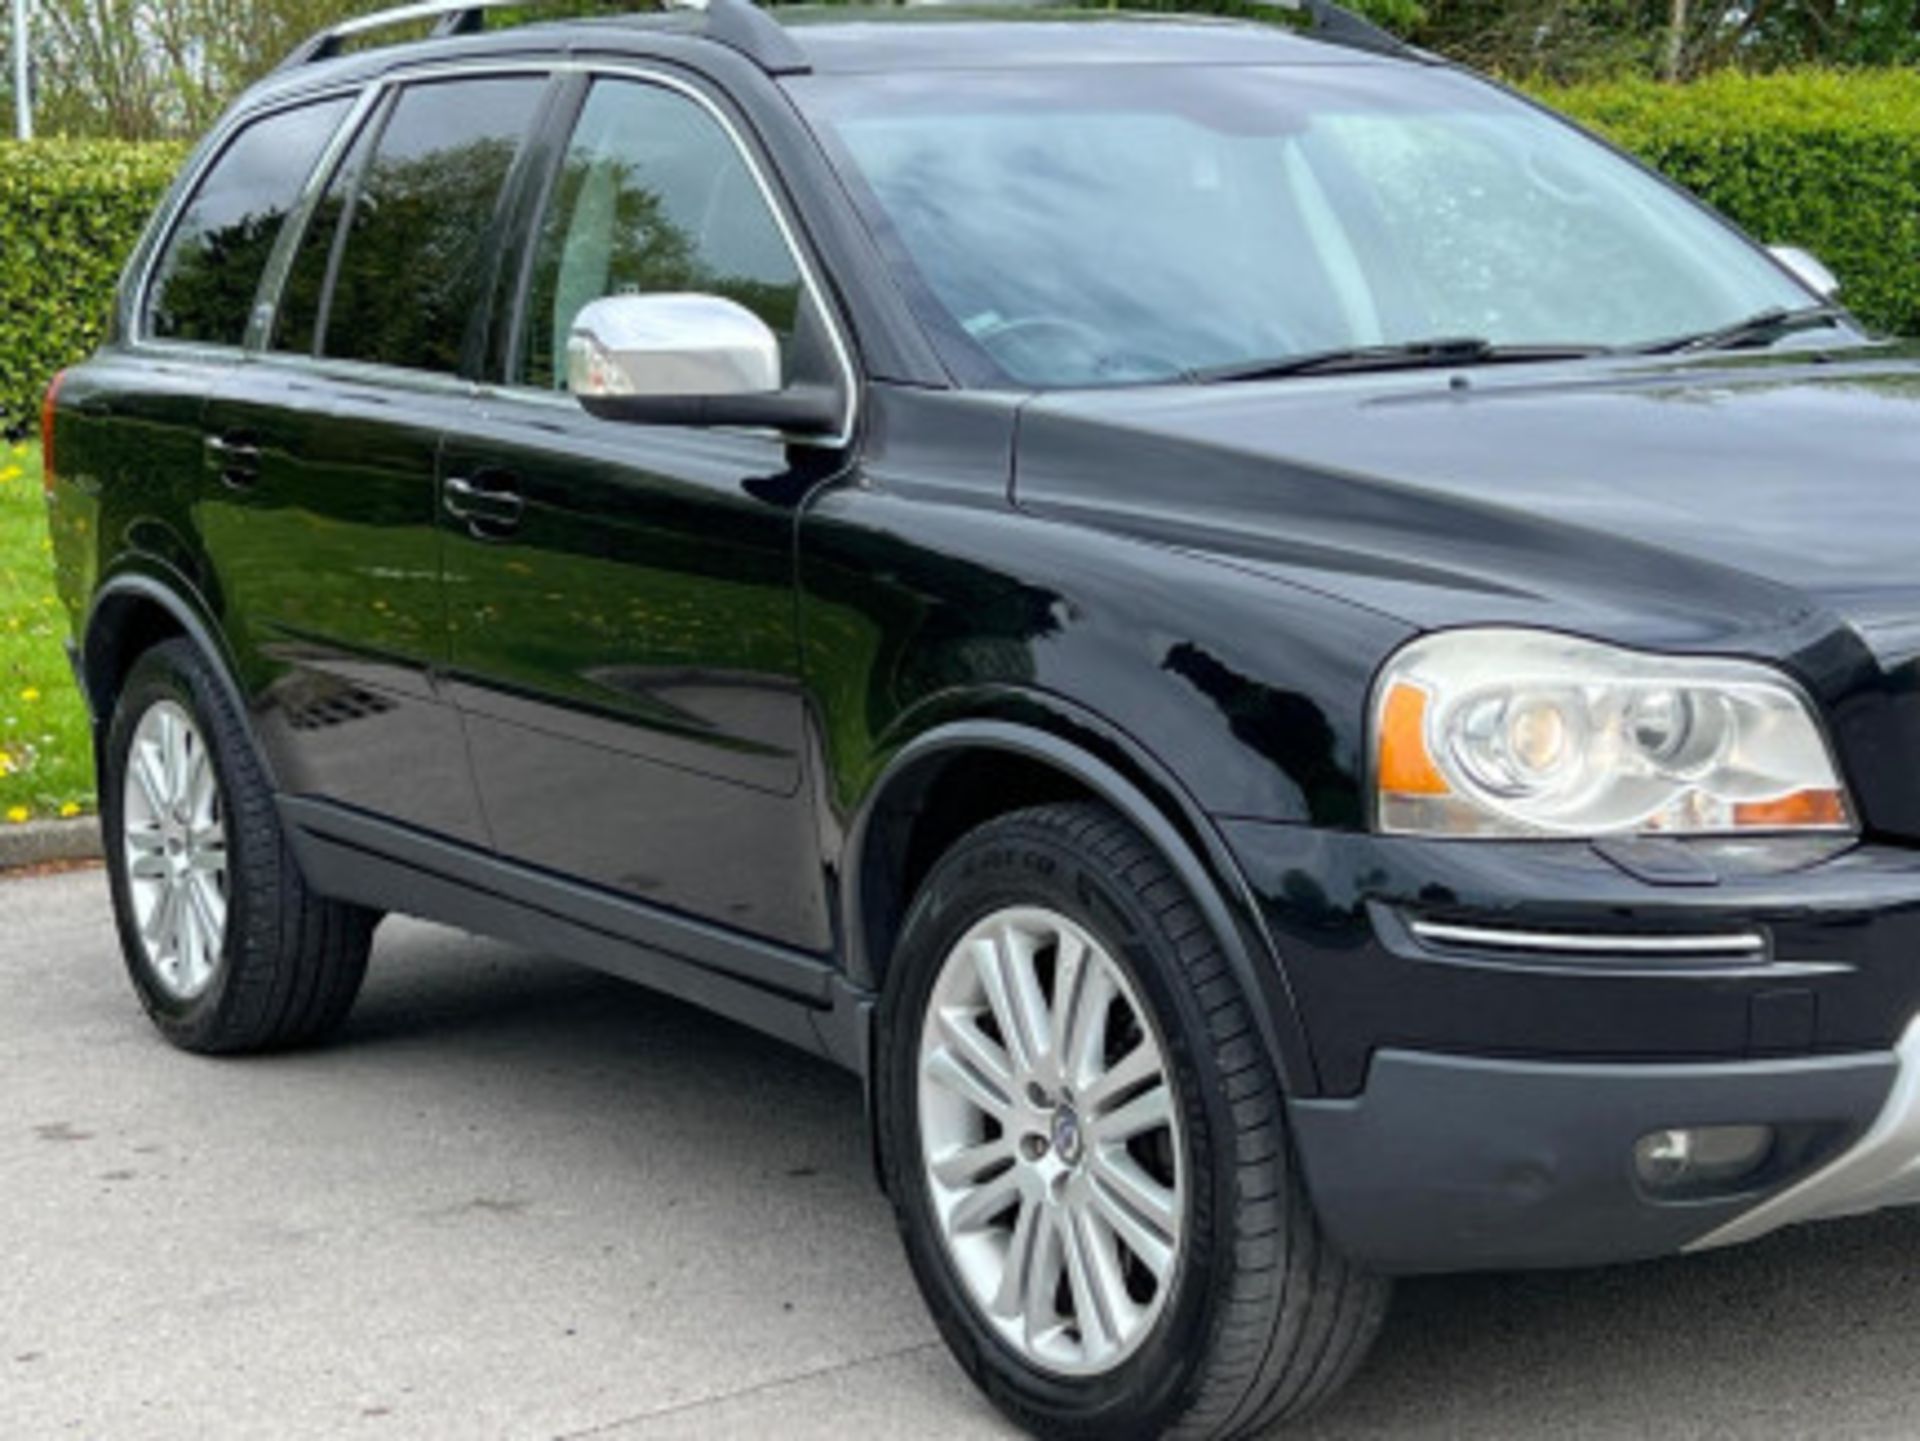 VOLVO XC90 2.4 D5 EXECUTIVE GEARTRONIC AWD, 5DR >>--NO VAT ON HAMMER--<< - Image 59 of 136